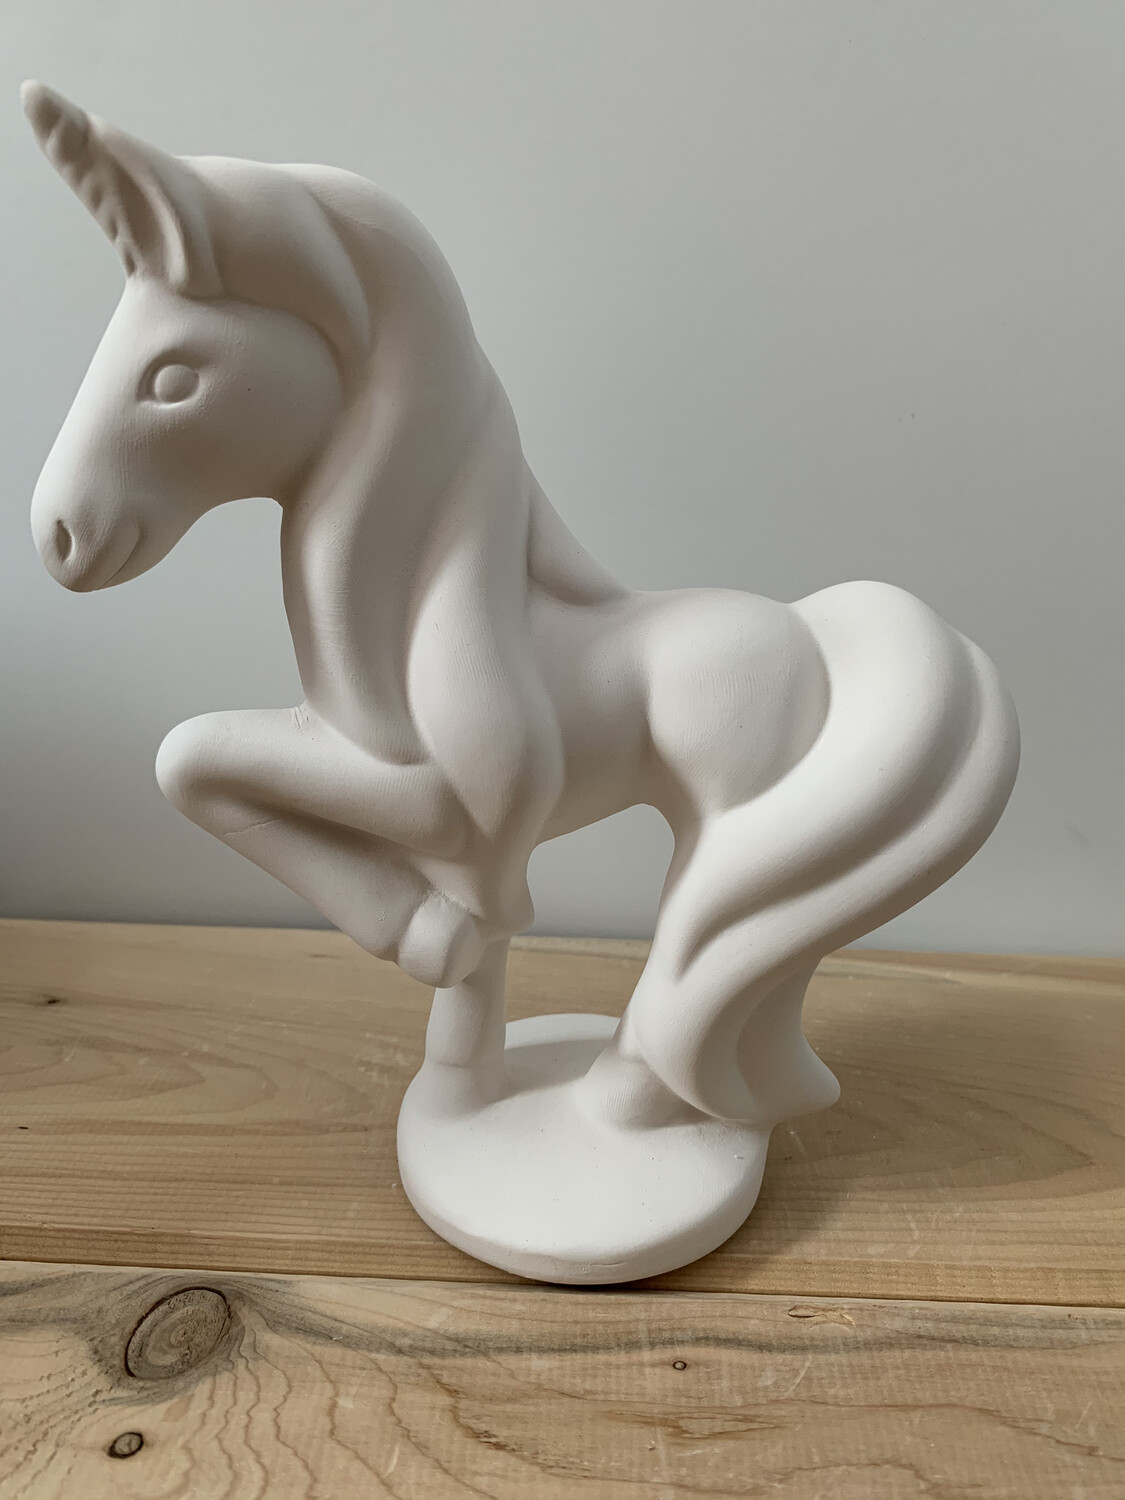 Paint Your Own Pottery - Ceramic
Prancing Unicorn Figurine Painting Kit